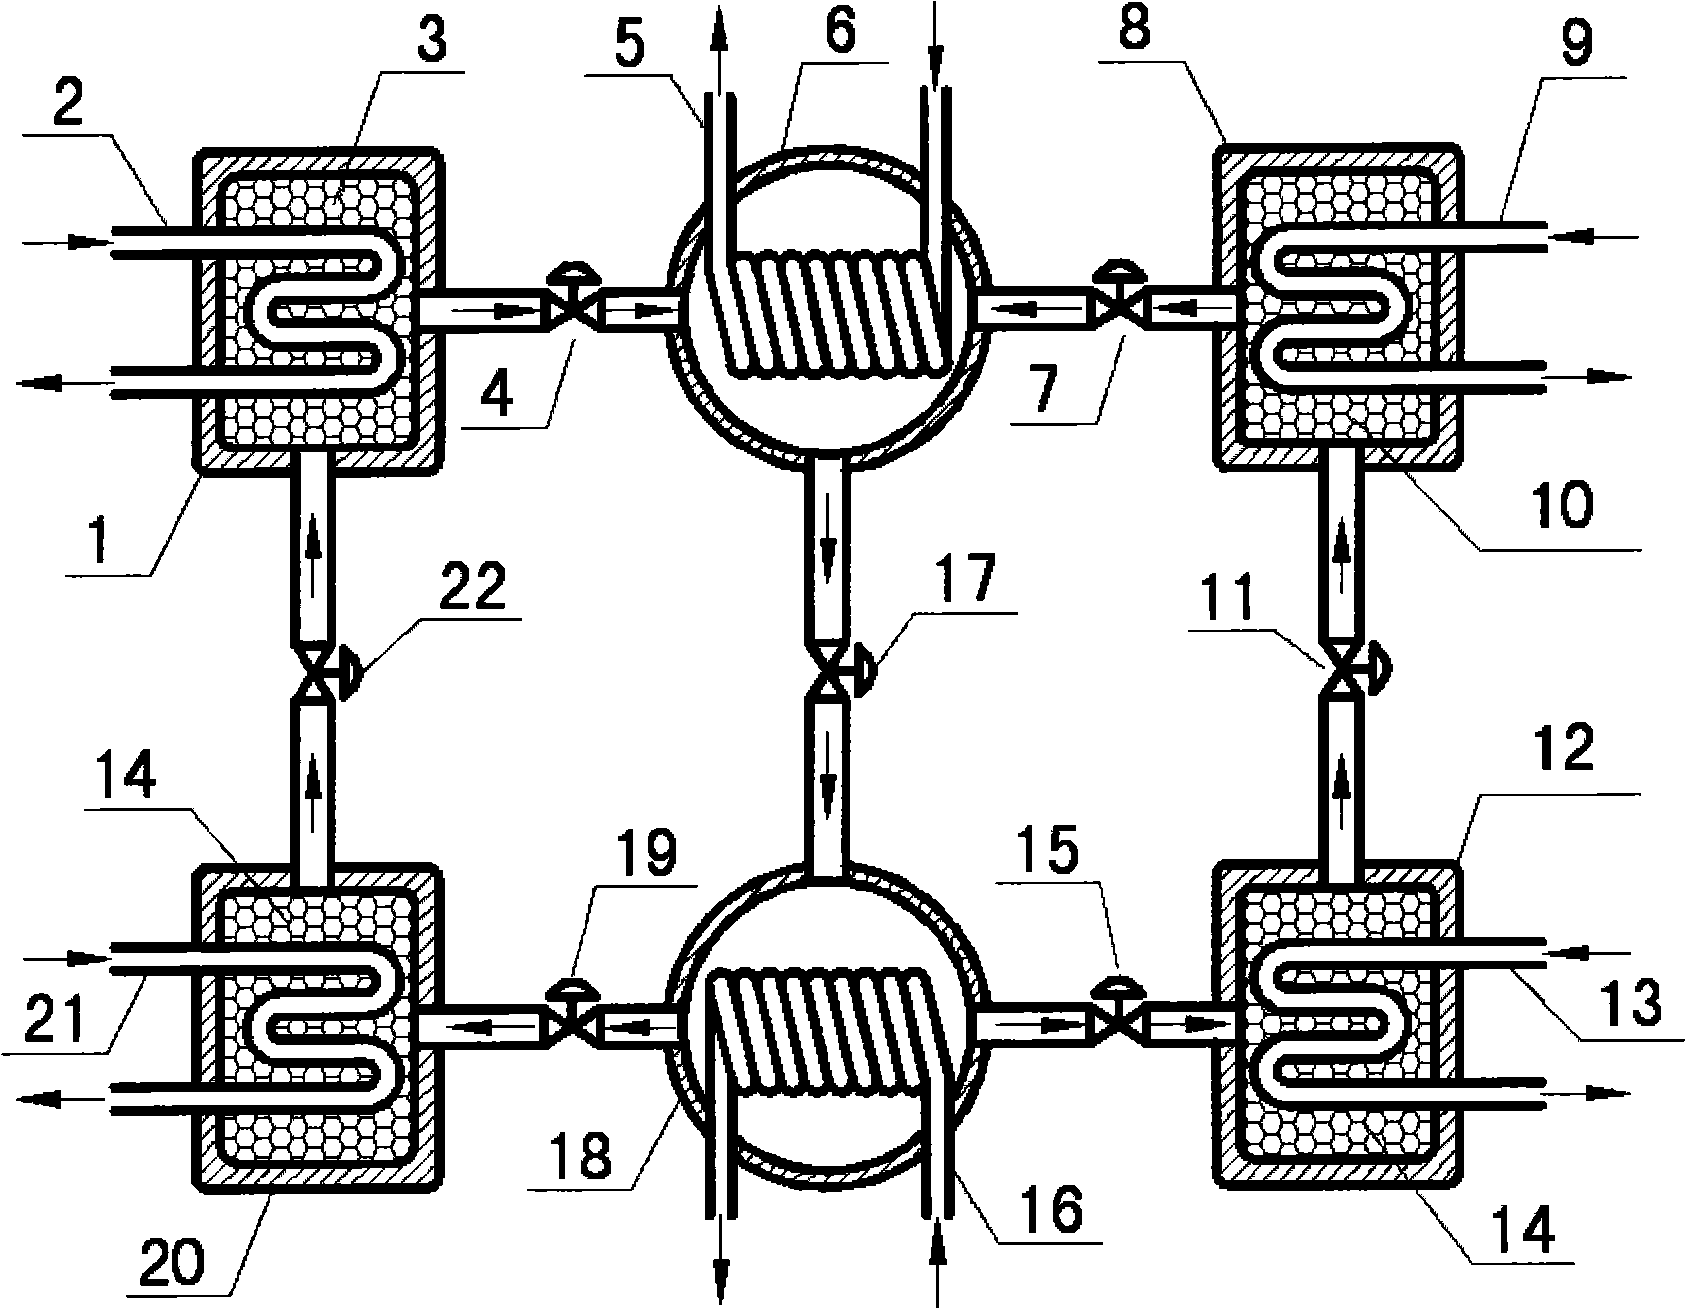 Dual-effect double-adsorption type refrigeration circulating system